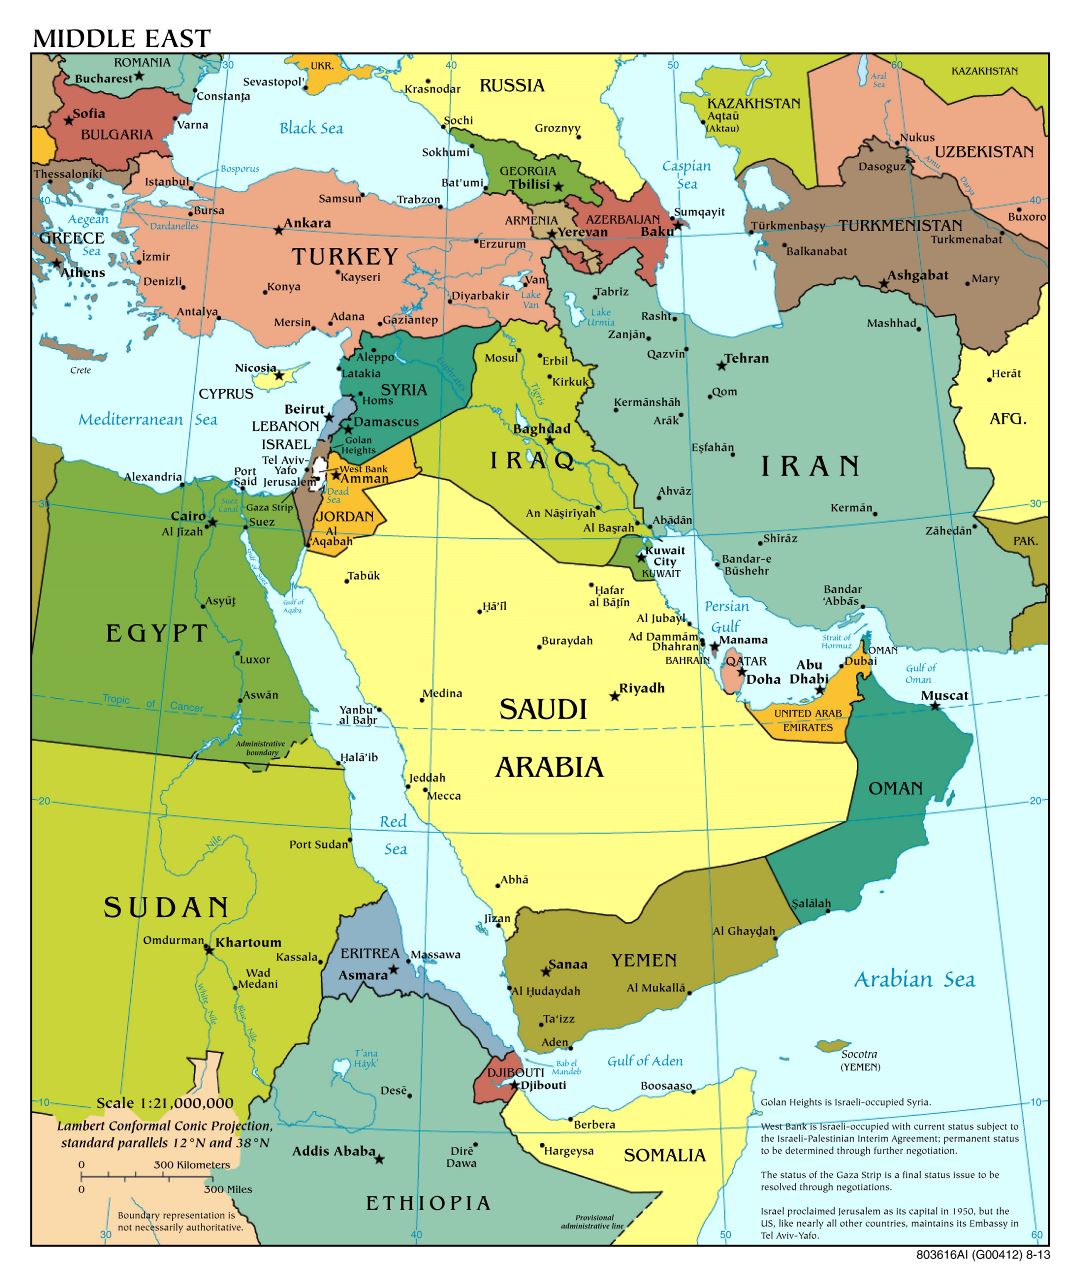 Large scale political map of the Middle East with major cities - 2013